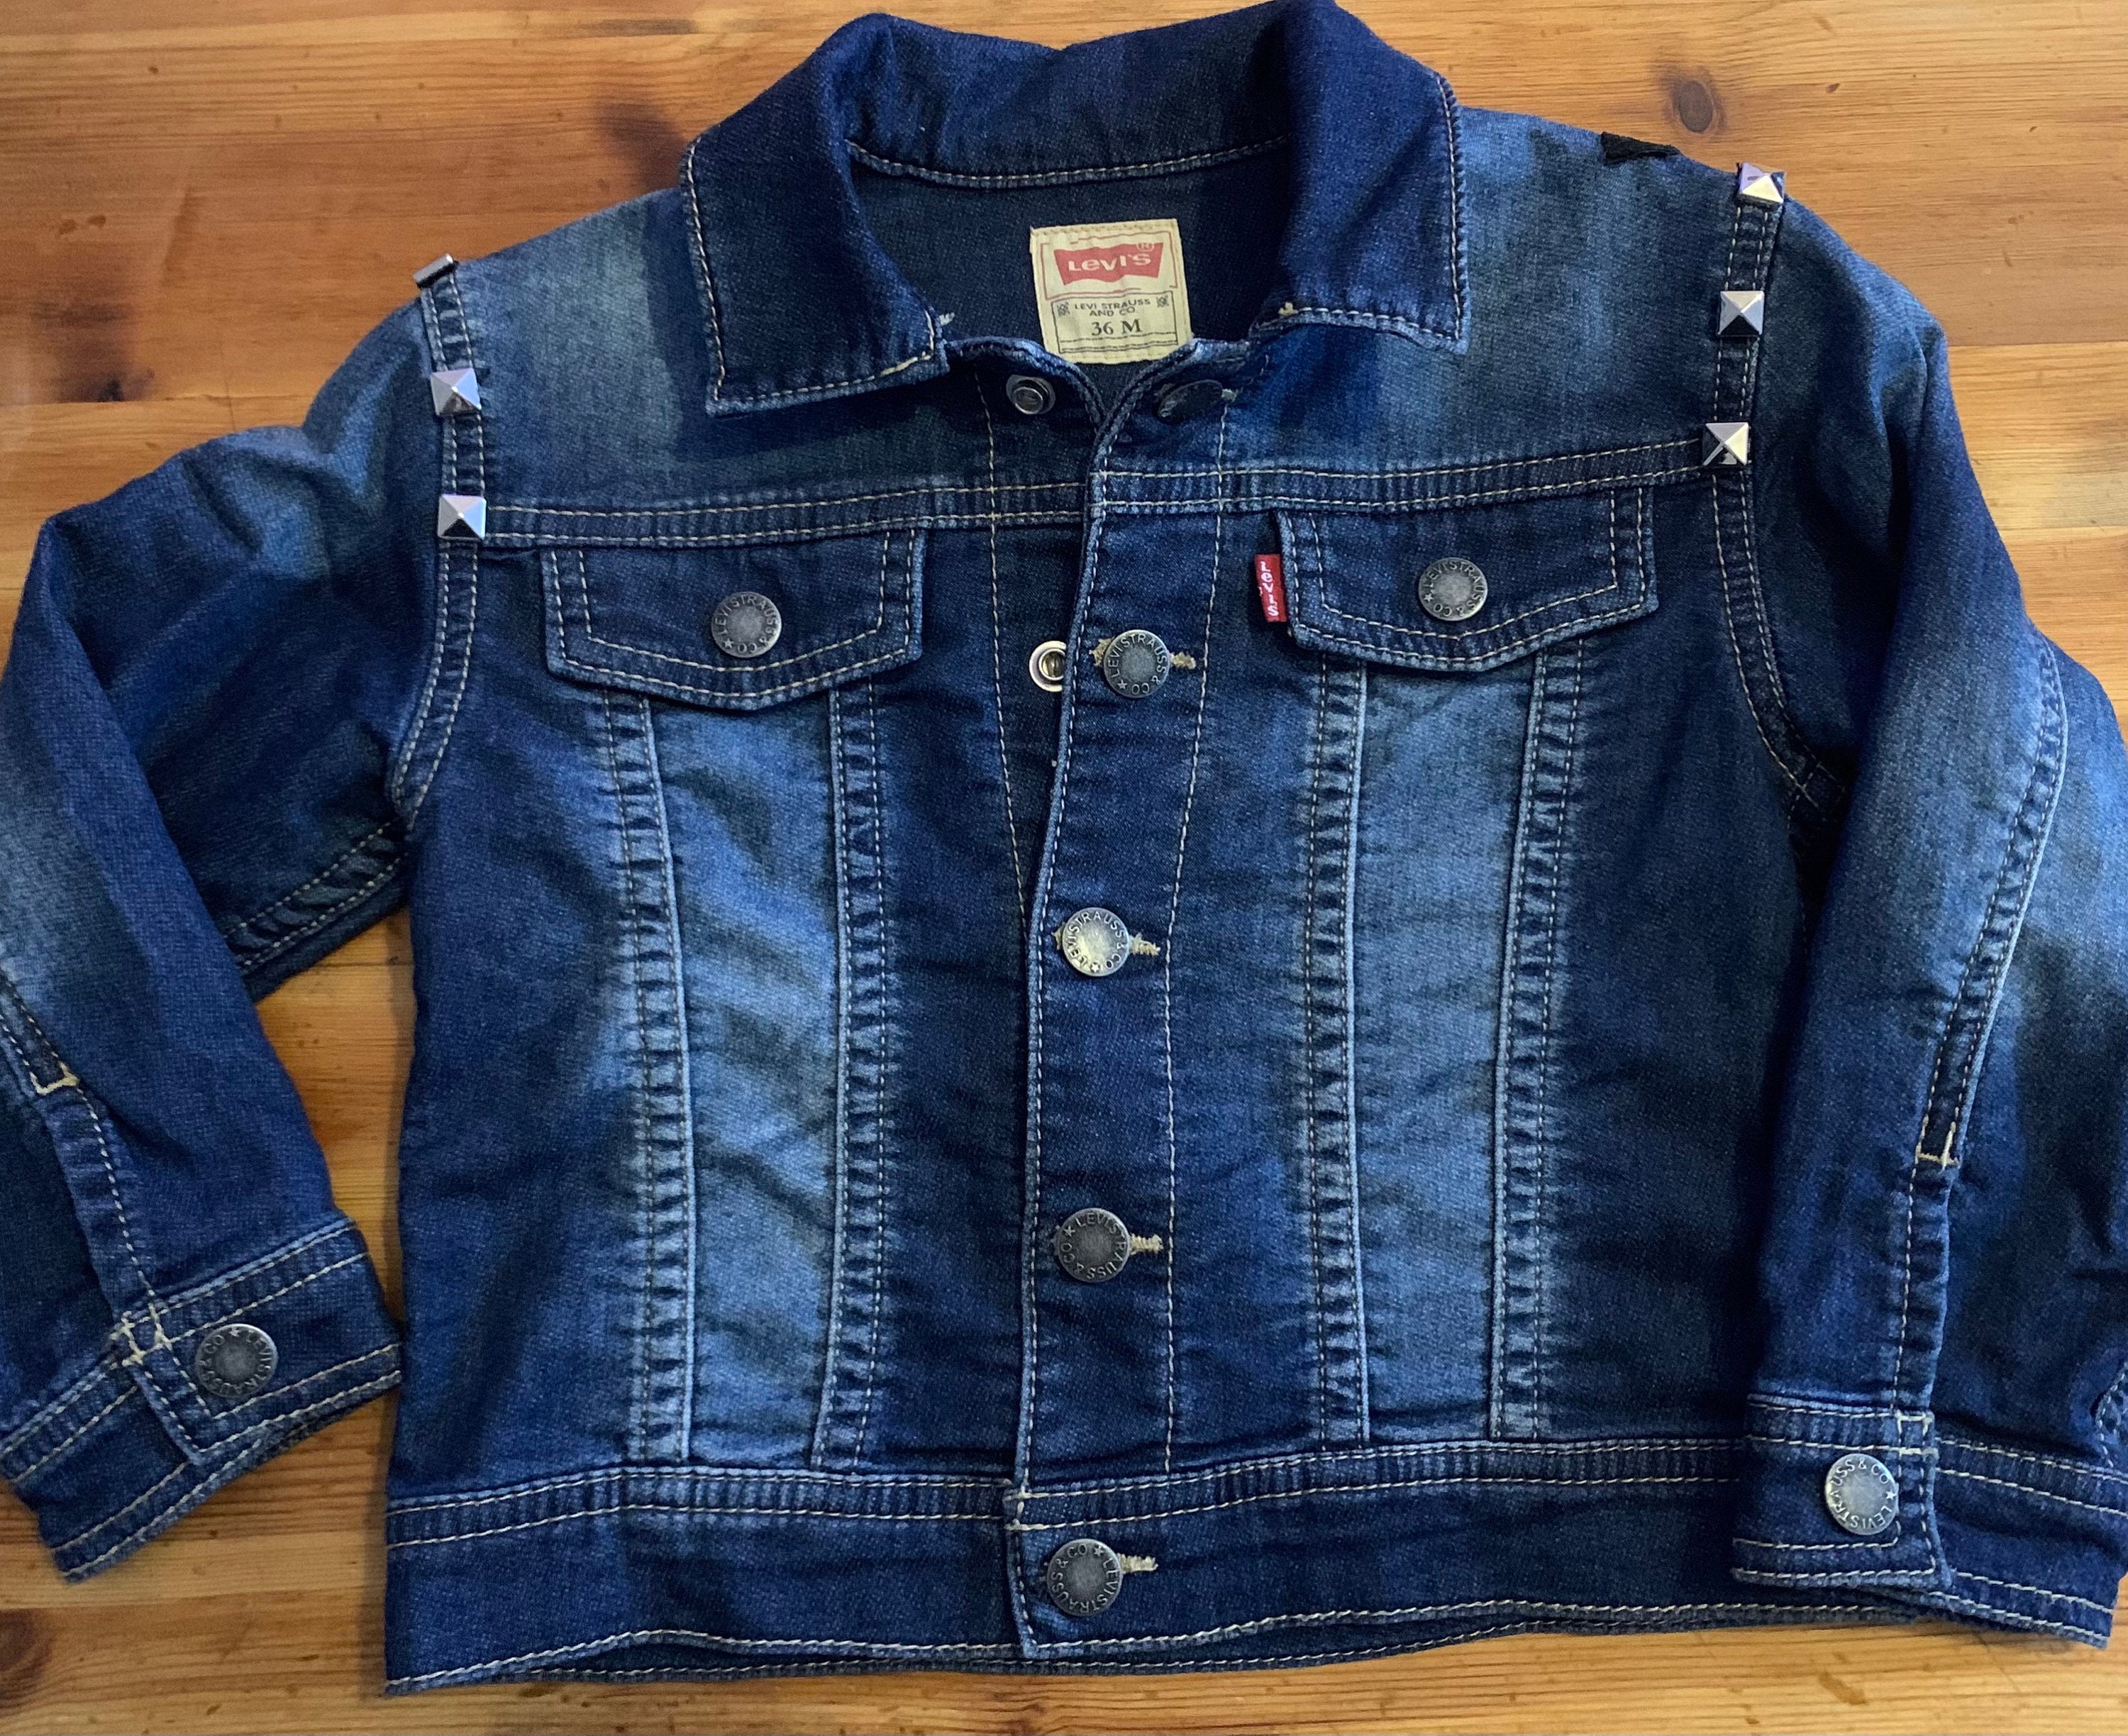 levi jean jackets for toddlers